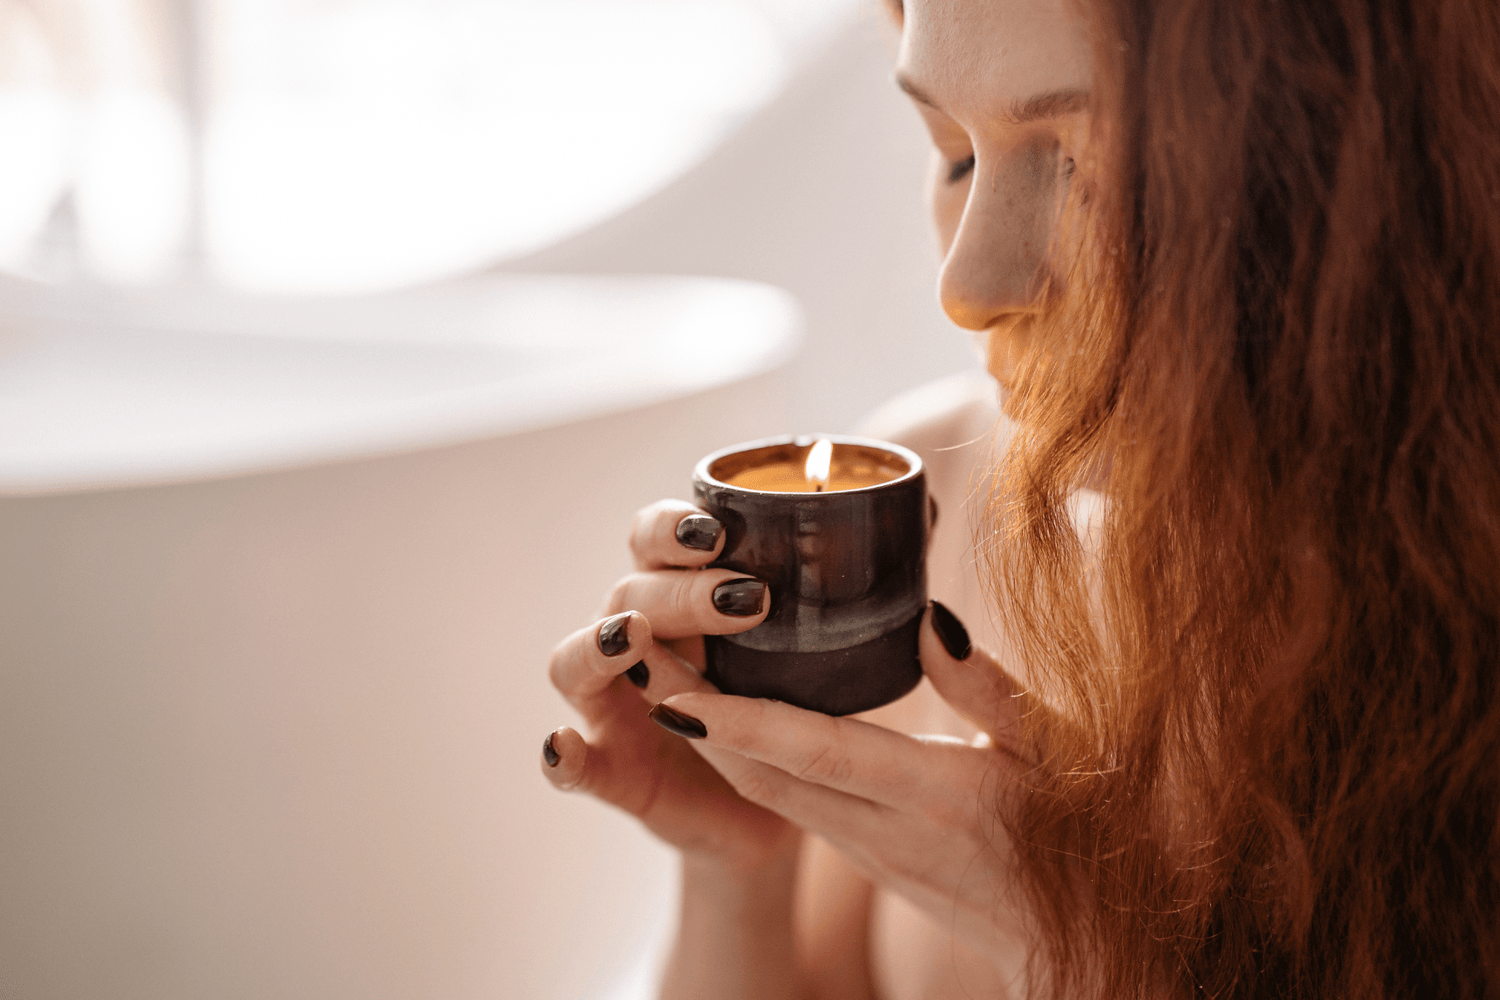 A person smelling a lit candle